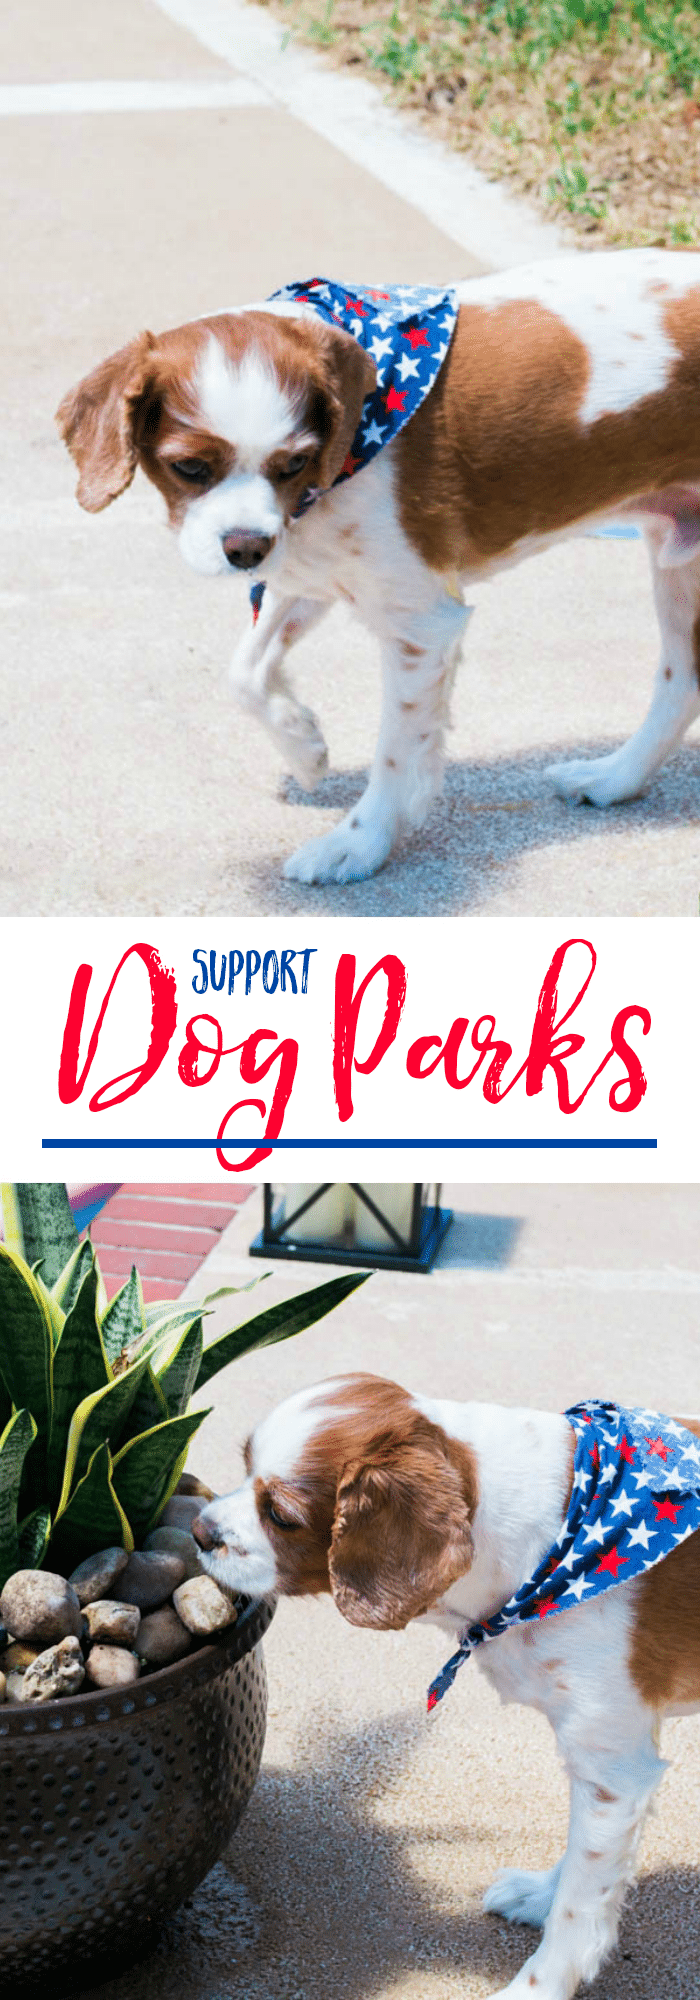 support the 2016 Dream Dog Park Project with the help of Beneful. It is an annual effort to help improve and build dog parks across the country. The goal is to provide financially and hands-on support to at least 12 dog parks in the U.S. This year, with GoFundMe is helping to reach this aim.